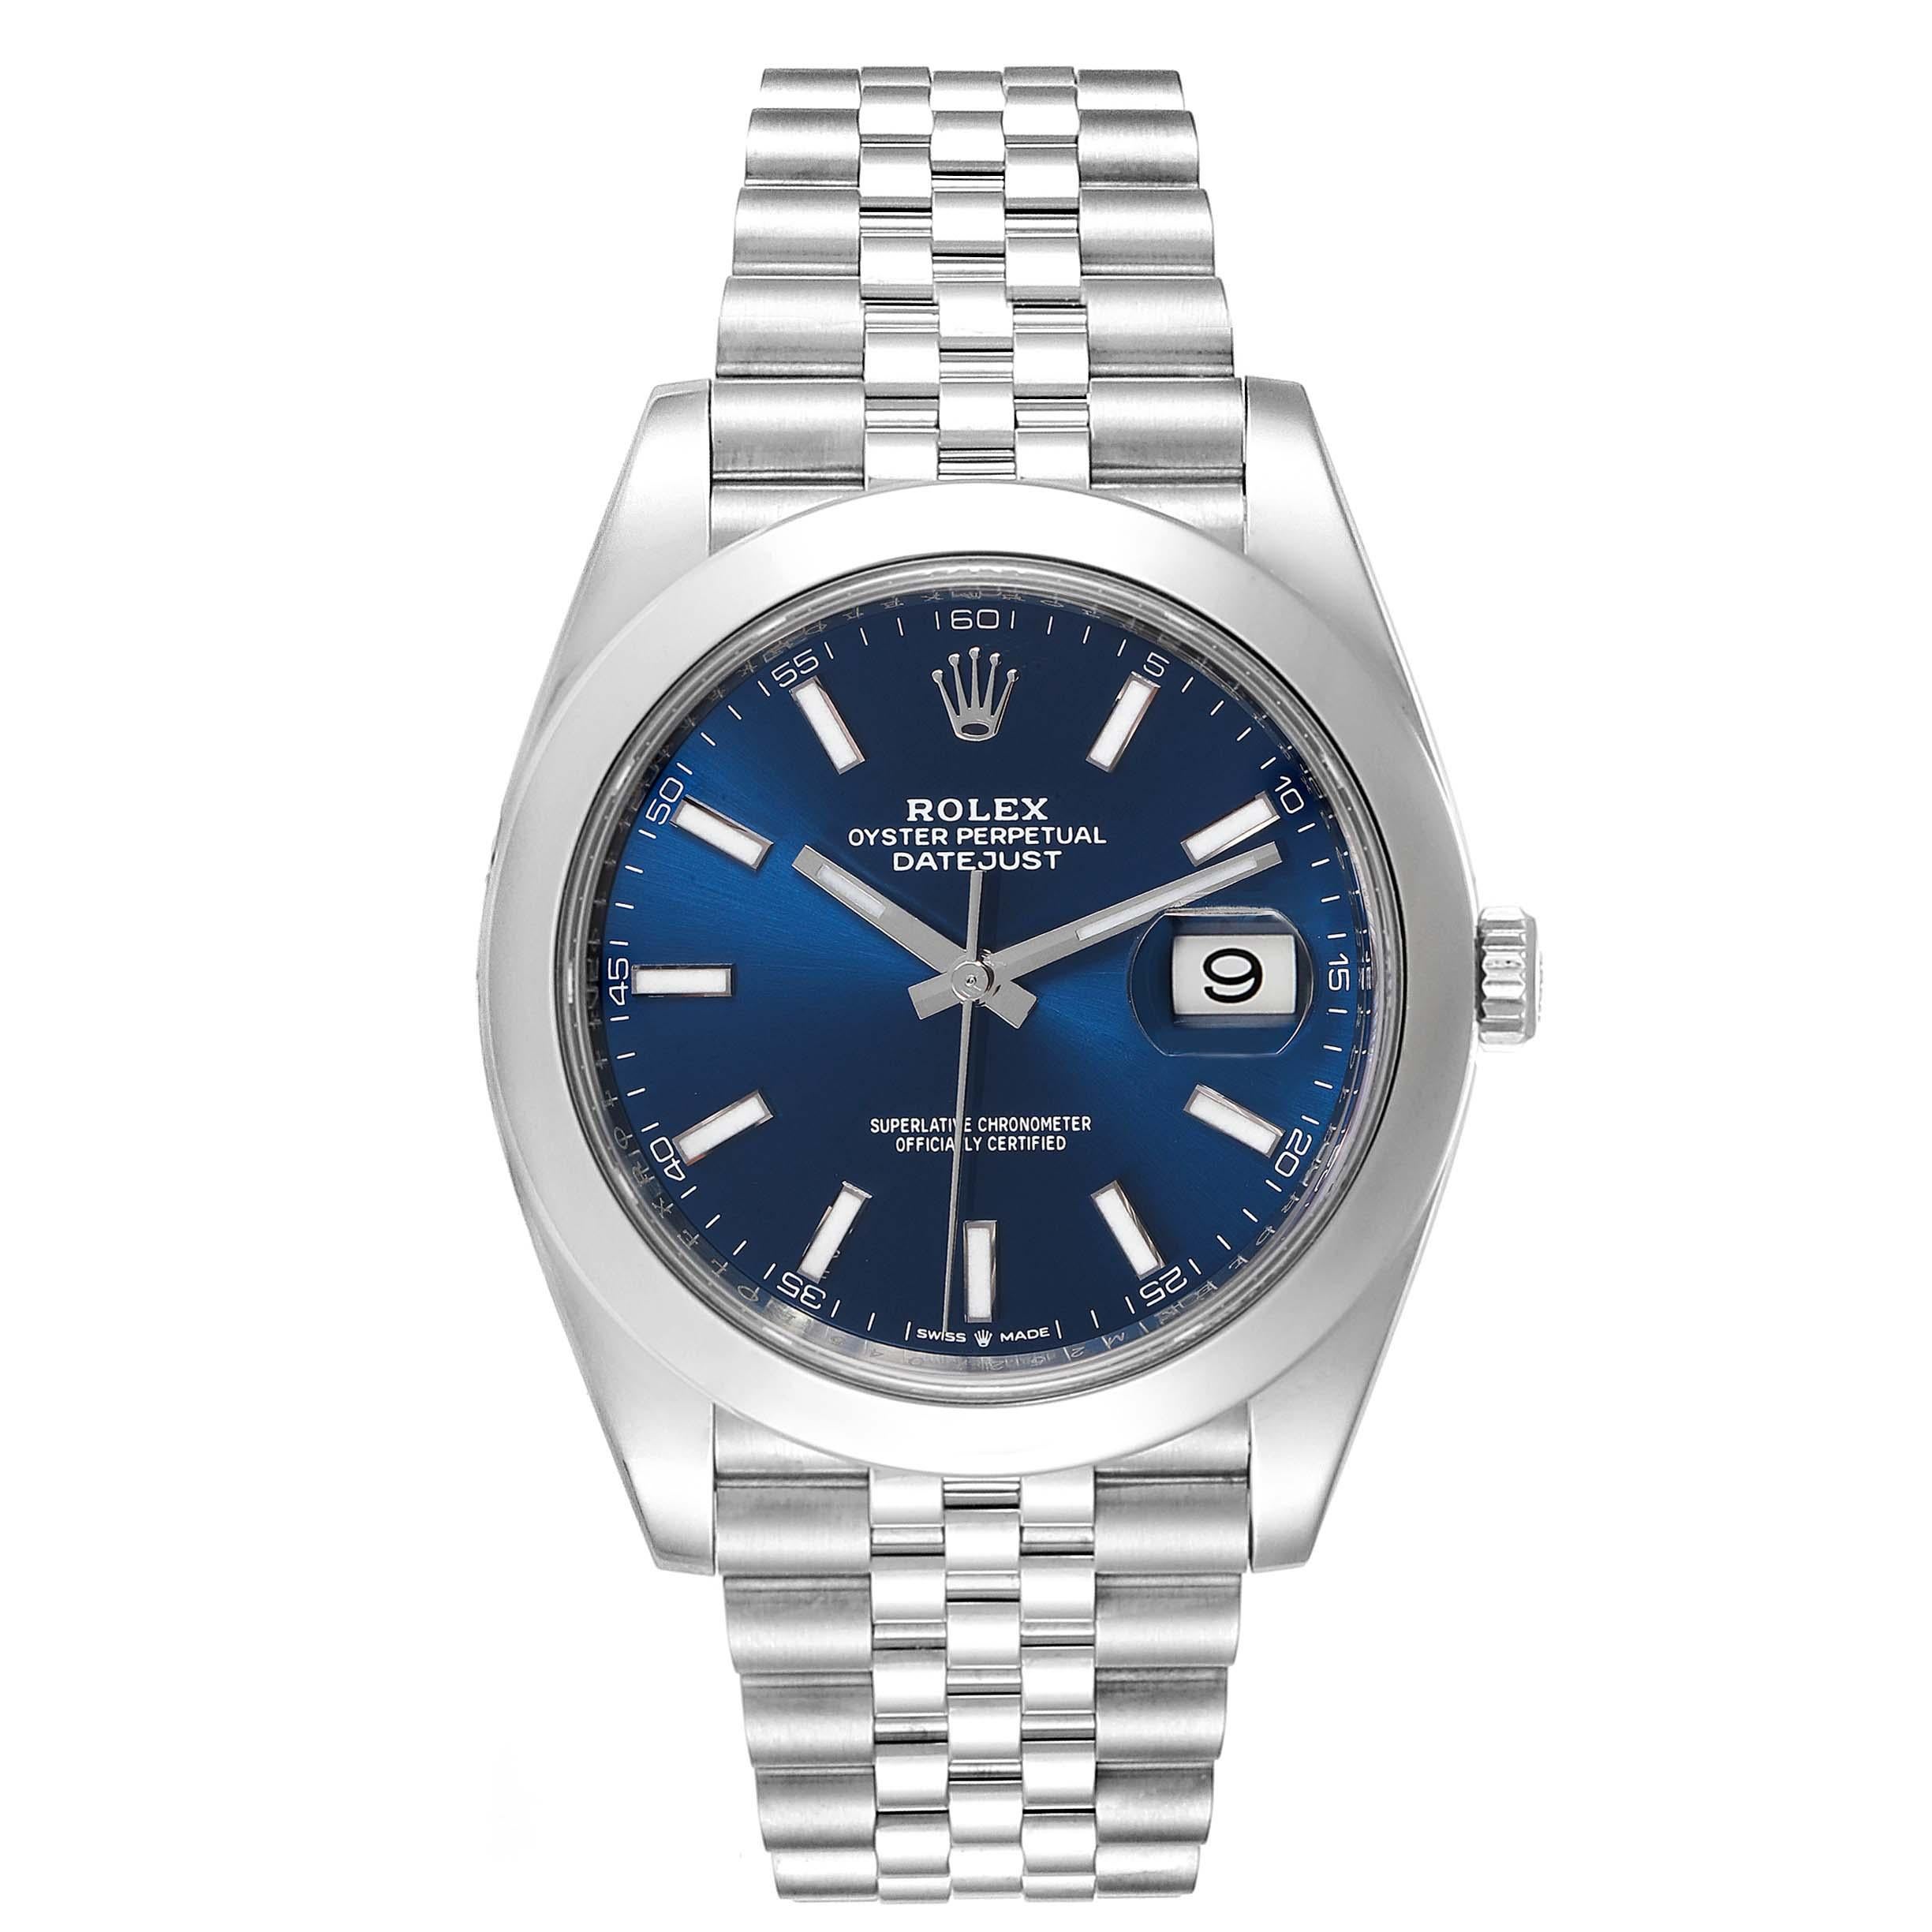 Rolex Datejust 41 Blue Dial Jubilee Bracelet Steel Mens Watch 126300. Officially certified chronometer automatic self-winding movement. Stainless steel case 41 mm in diameter. Rolex logo on a crown. Stainless steel smooth domed bezel. Scratch